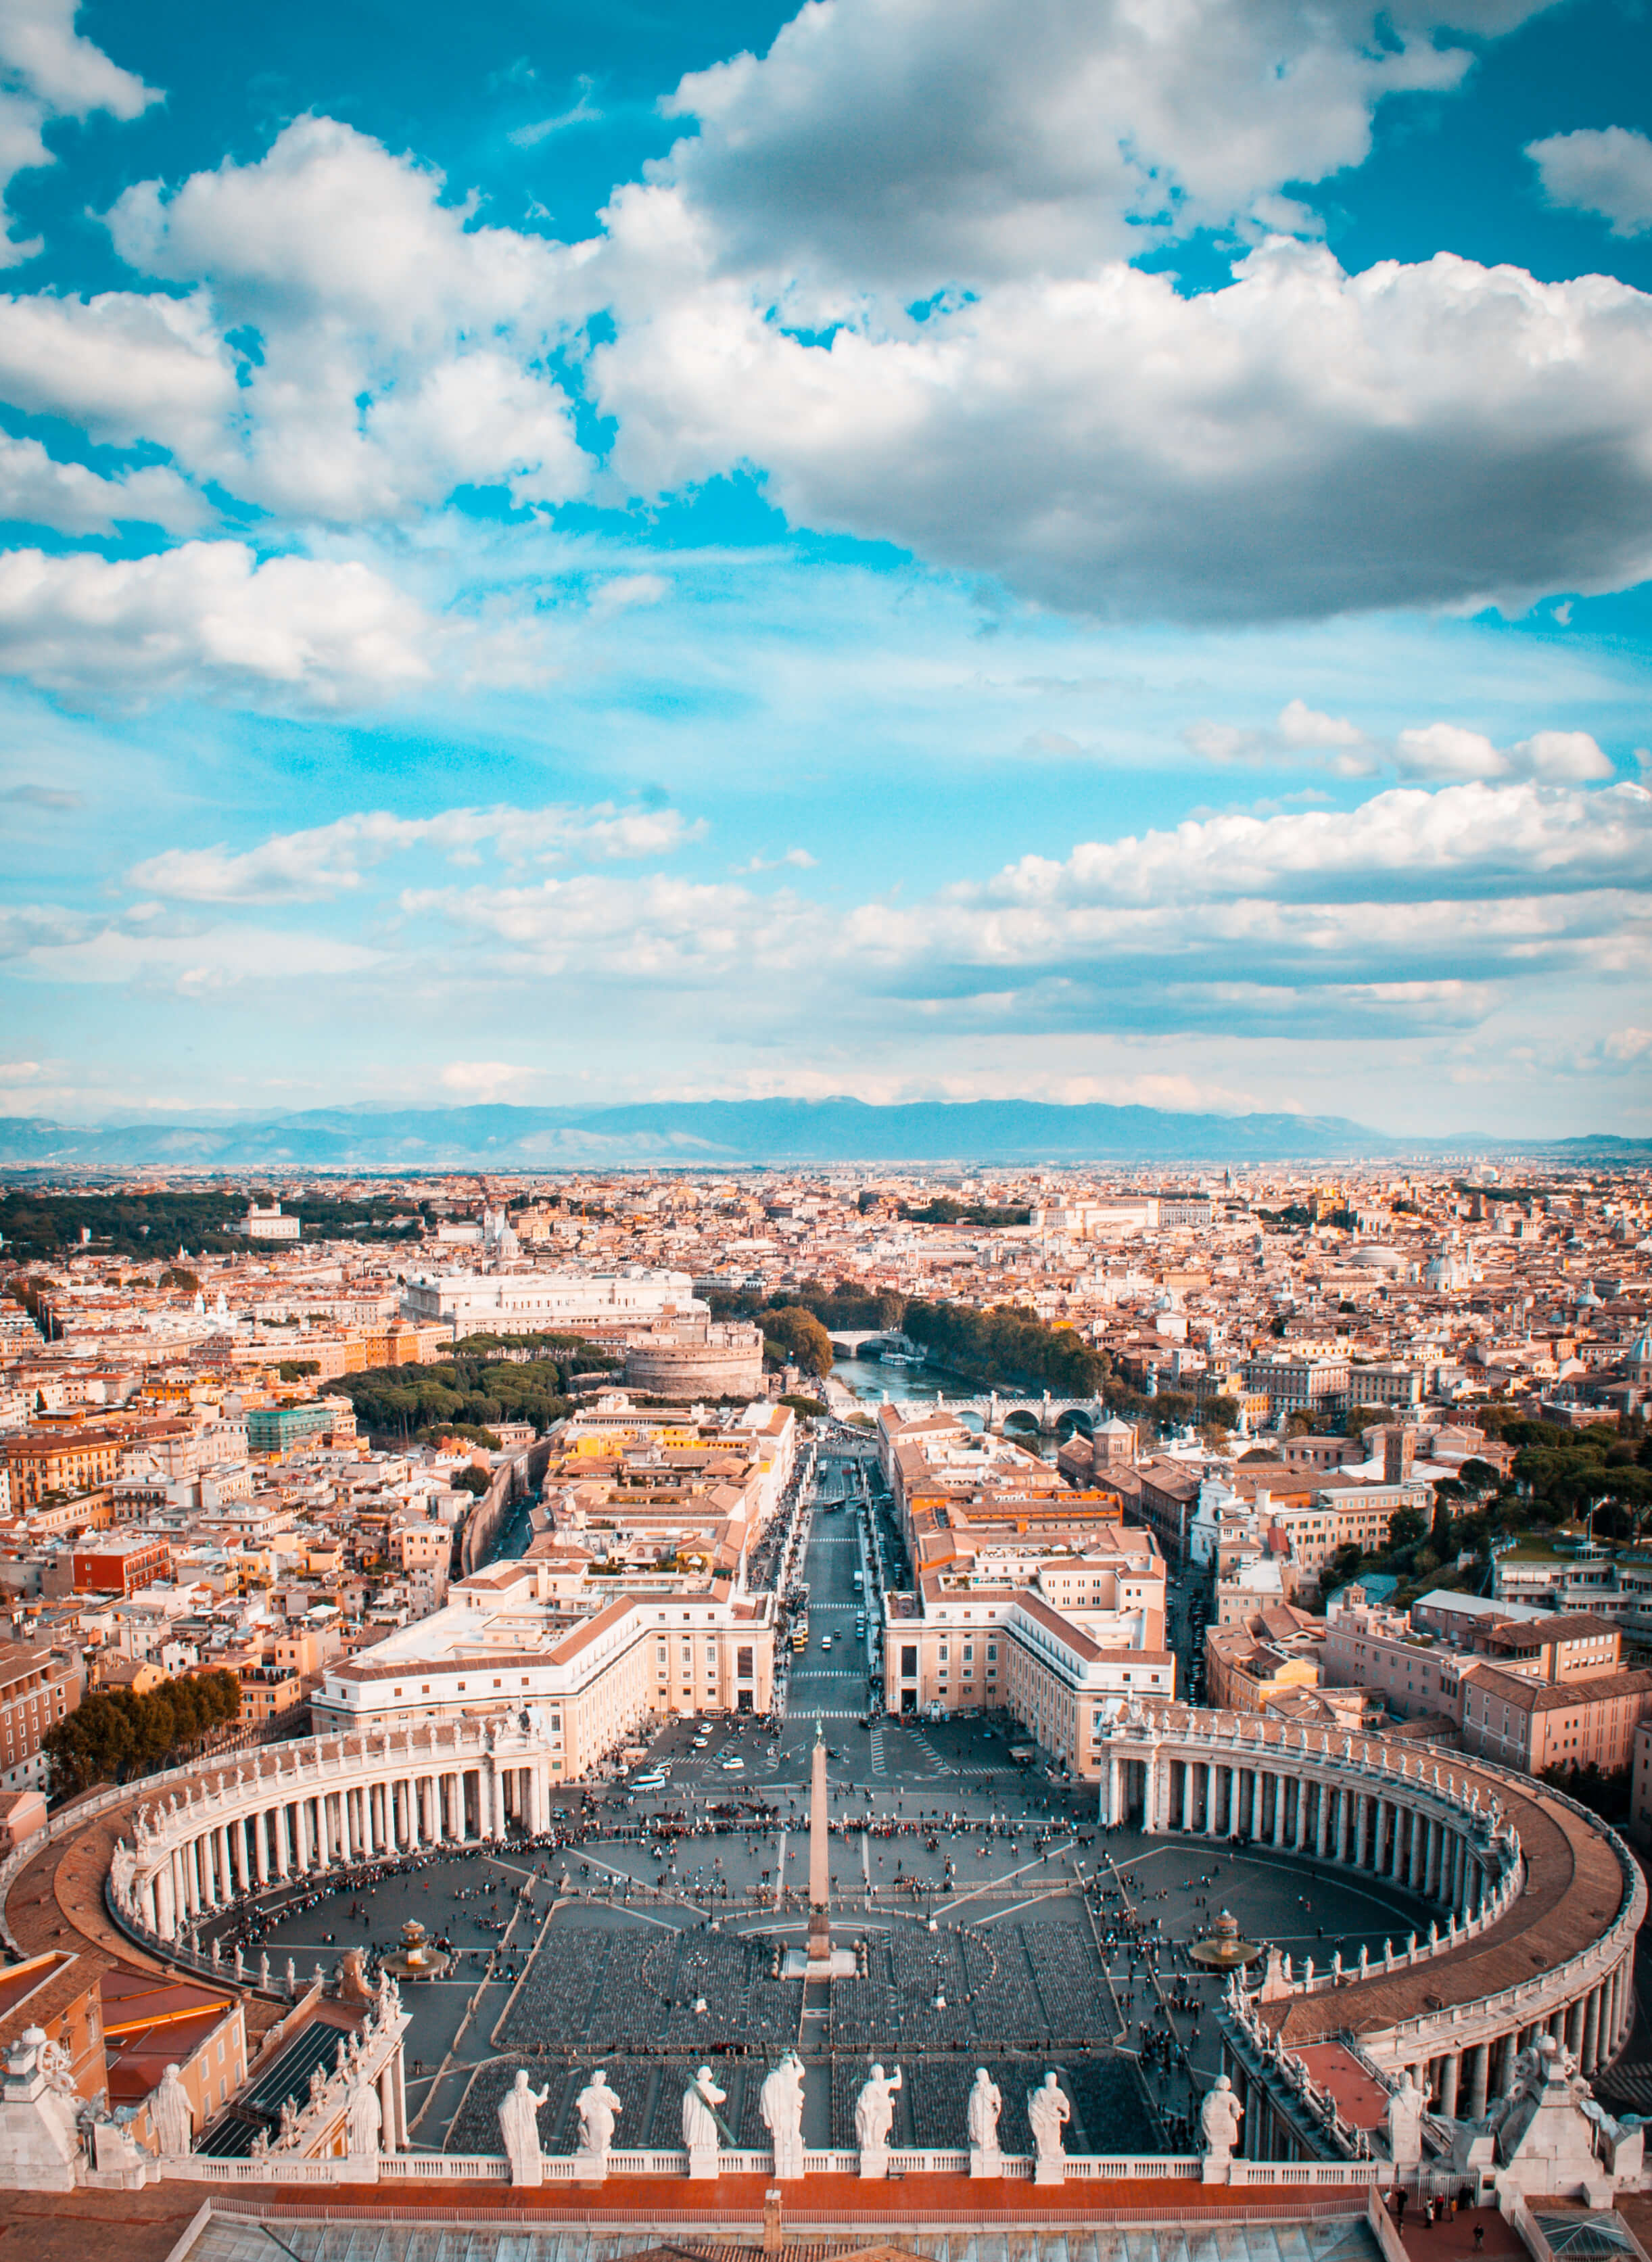 Piazza San Pietro. Plaza located directly in front of St. Peter's Basilica. Vatican City, Rome, Italy.The Vtican city is declared a UNESCO World Heritage Site ref. 286